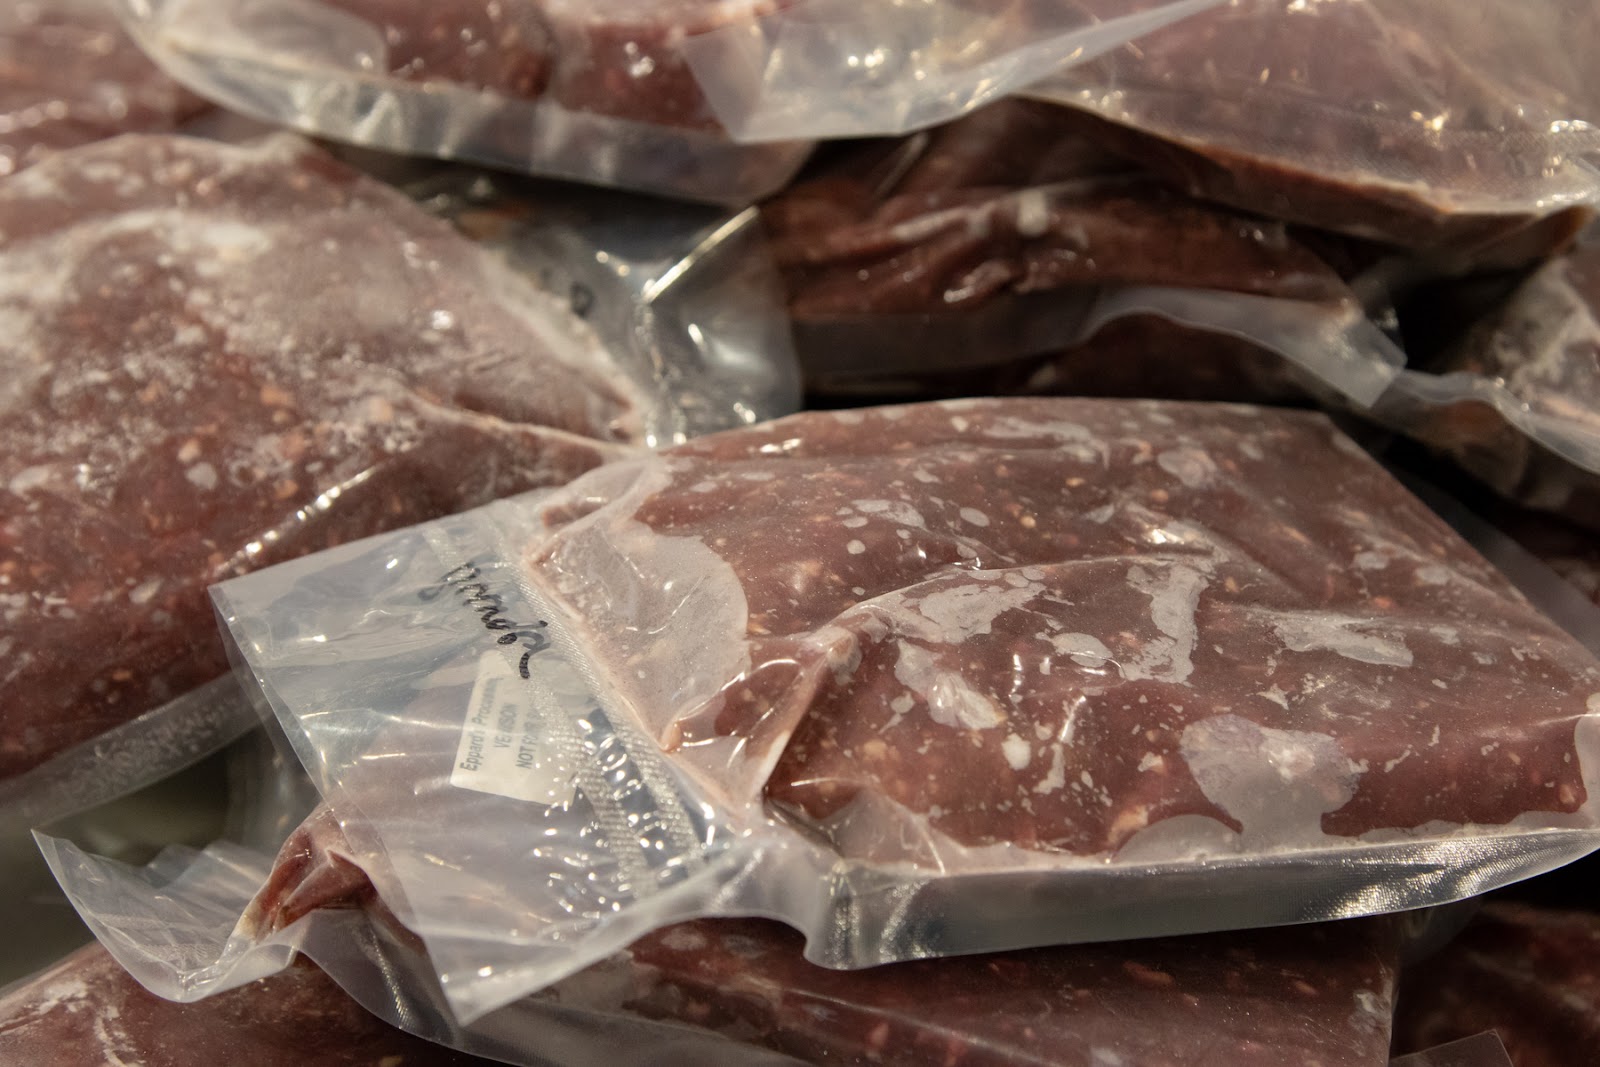 A closeup shows packages of frozen red meat.